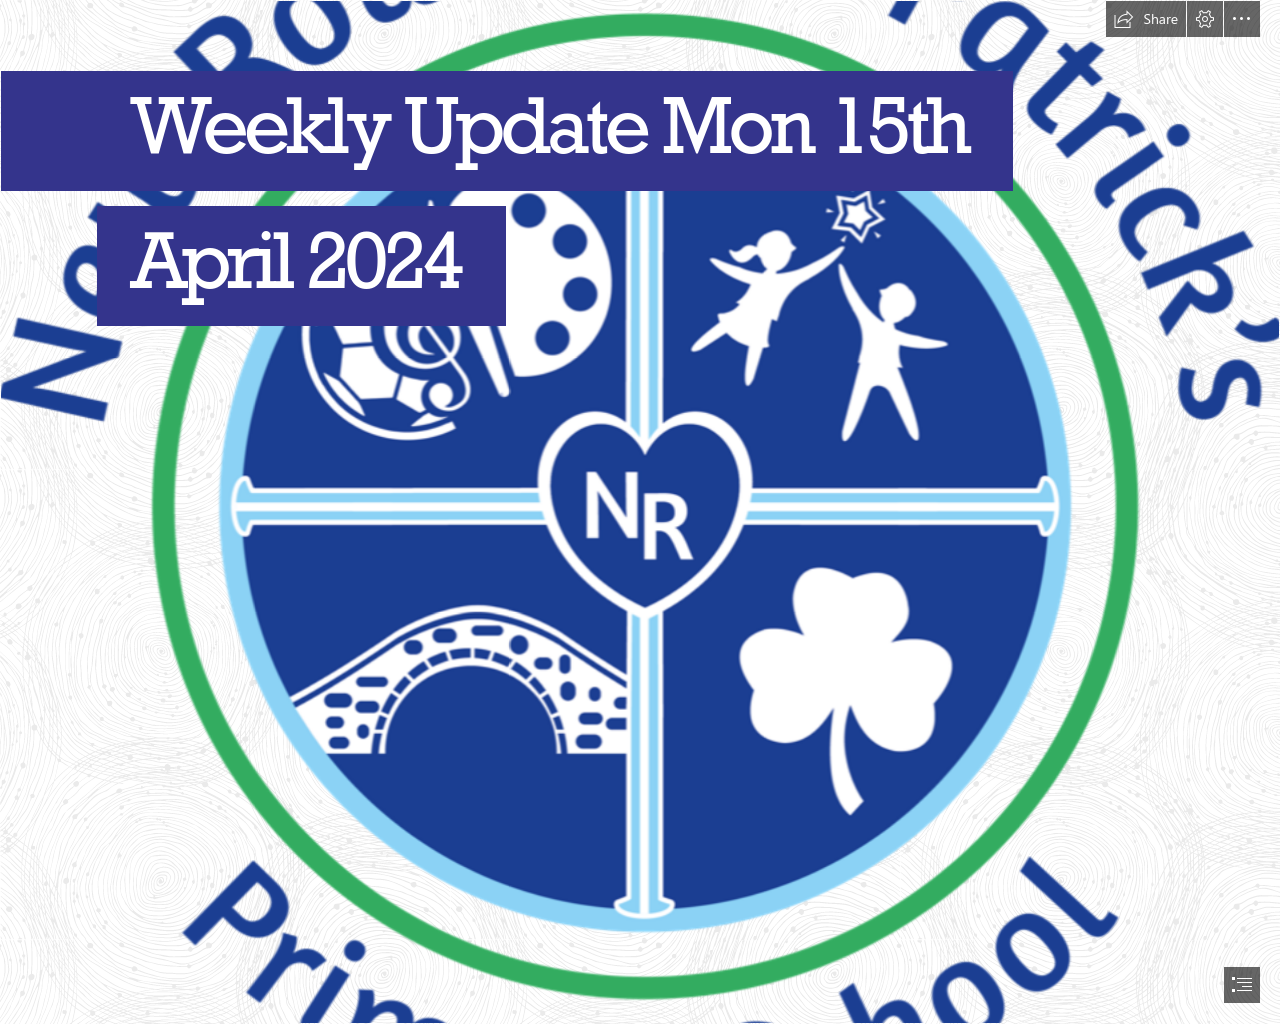 Weekly Update Monday 15th April 2024